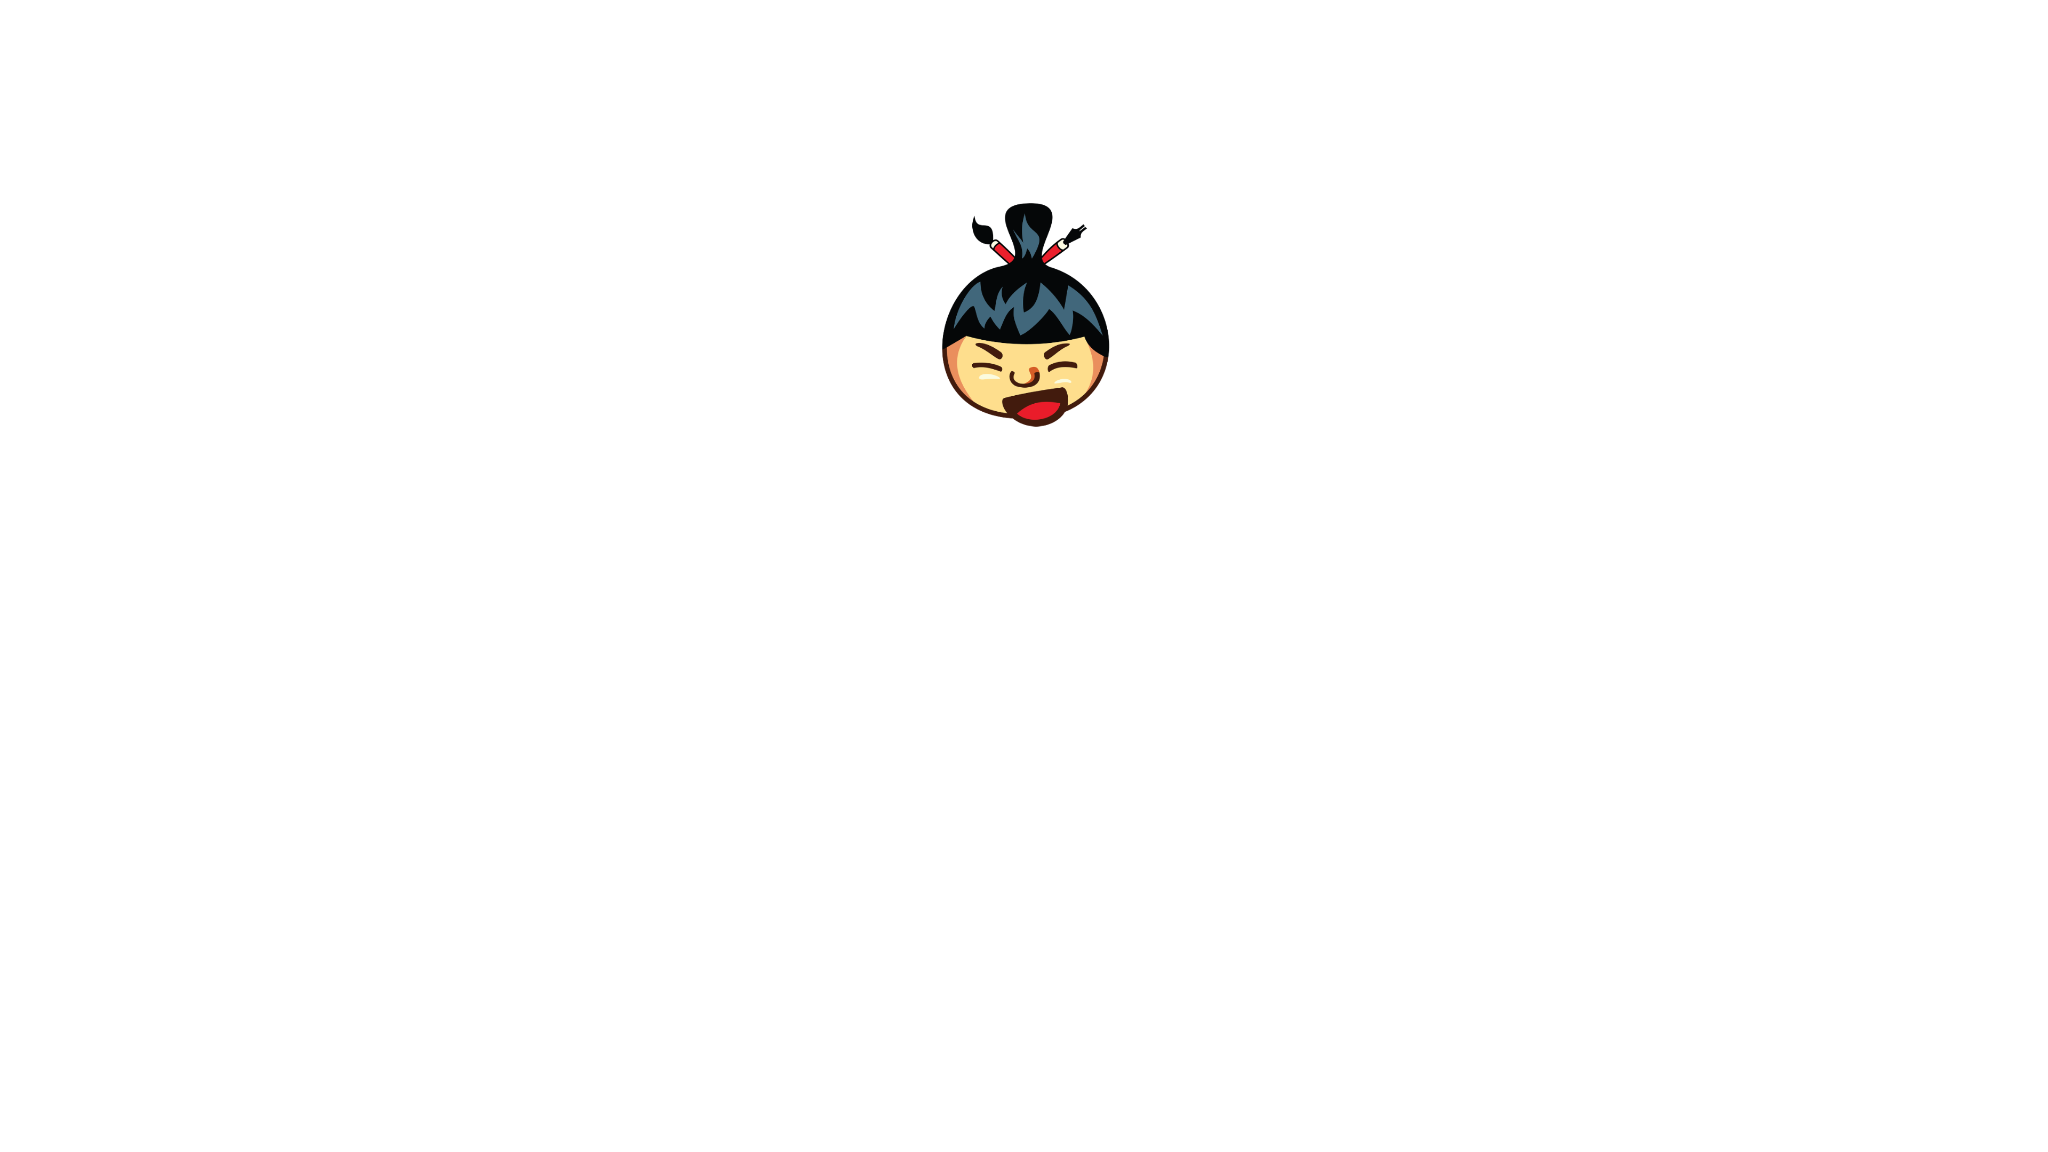 Sumo Video Intro - created by Lauri Koutaniemi with paint